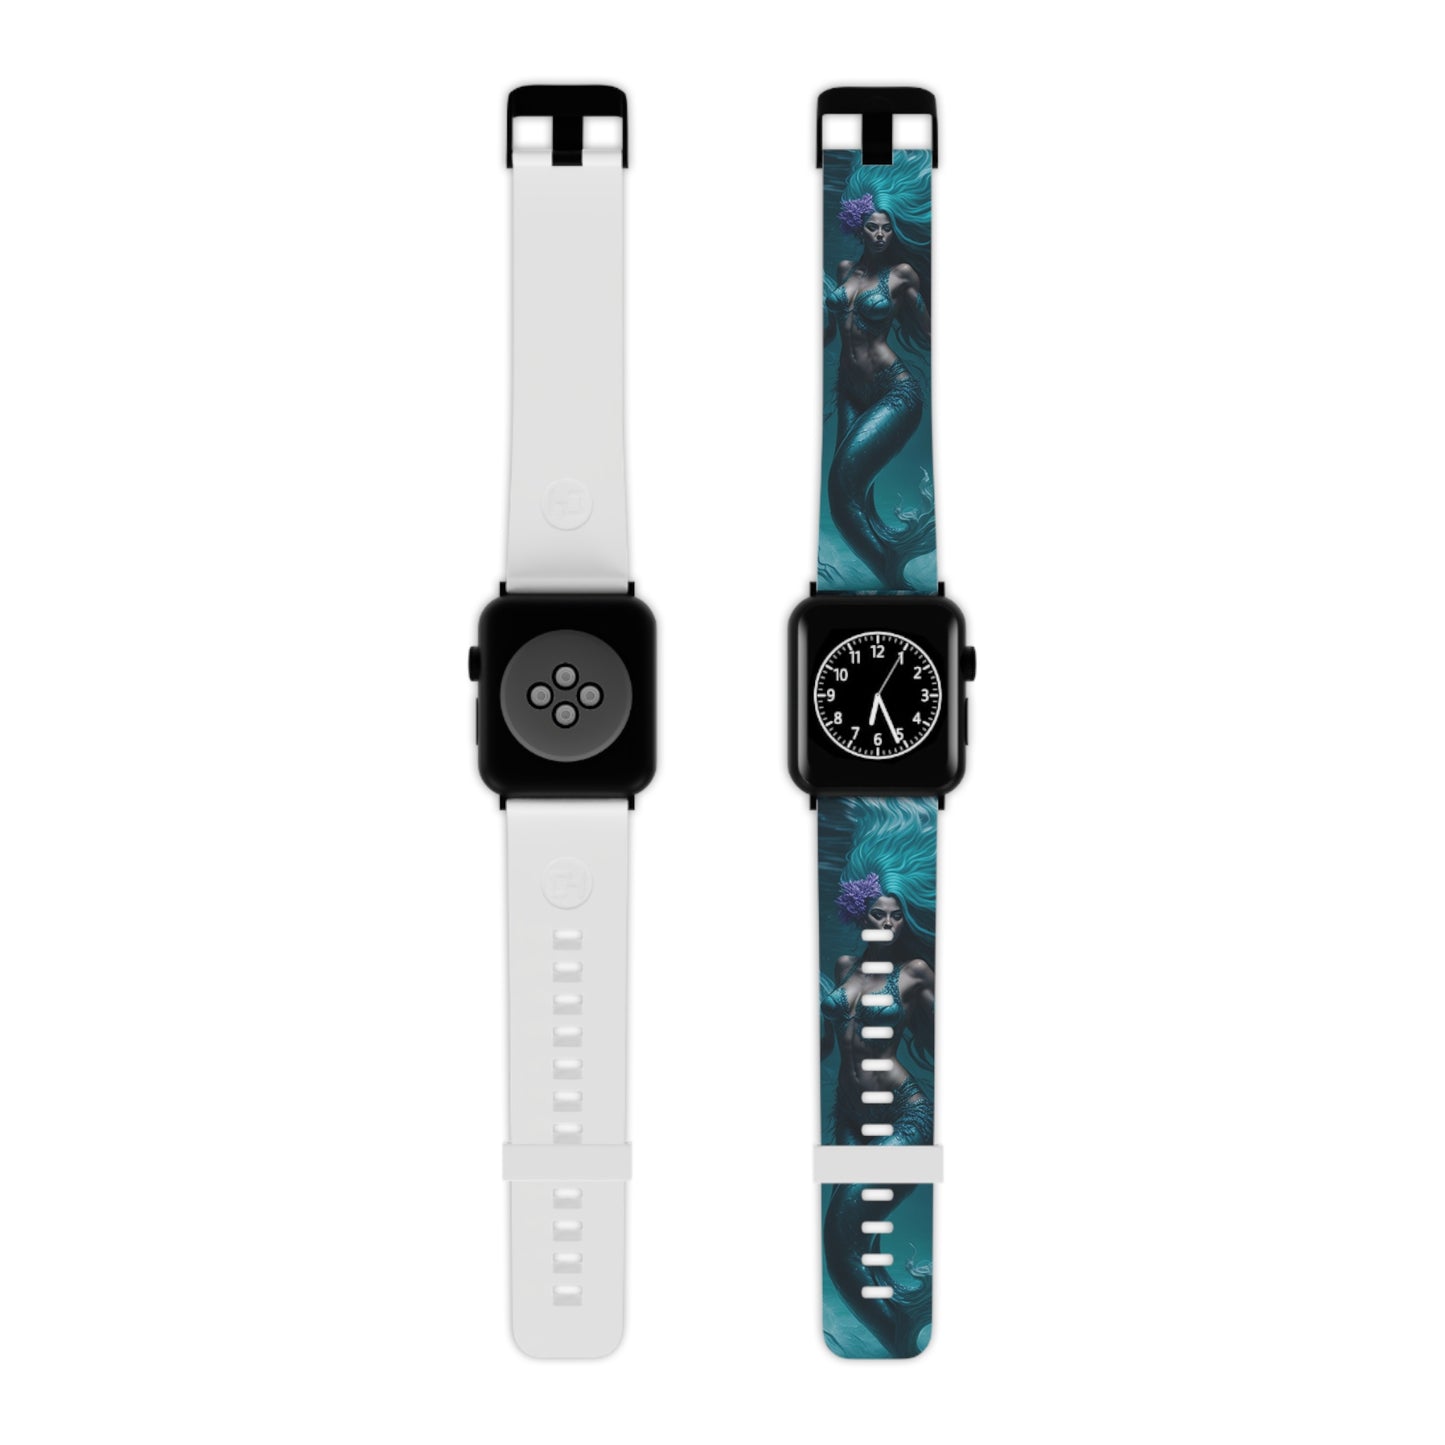 Mermaid Apple Watch Band, Professional-Grade Thermo Elastomer Material | Compatible with Apple Watch Series 1-8 & SE, Great Gift, Man, Woman